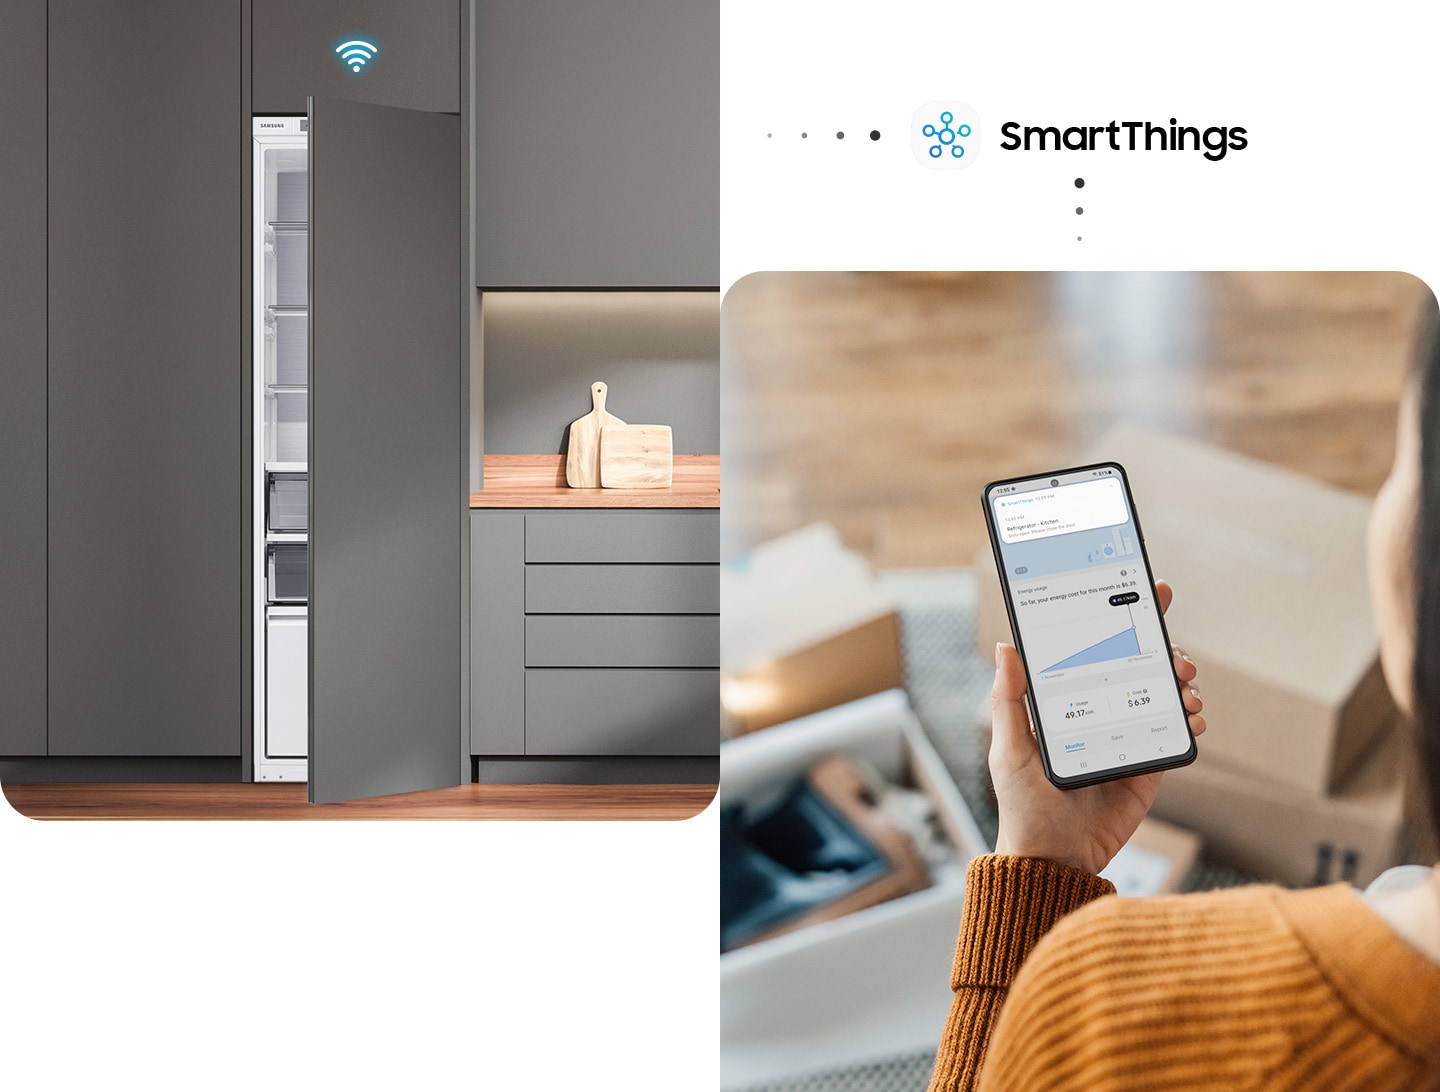 The door of the BRR6000B is half open, and the Wi-Fi icon floats above it. Users check the status of refrigerators with their smartphones through SmartThings.